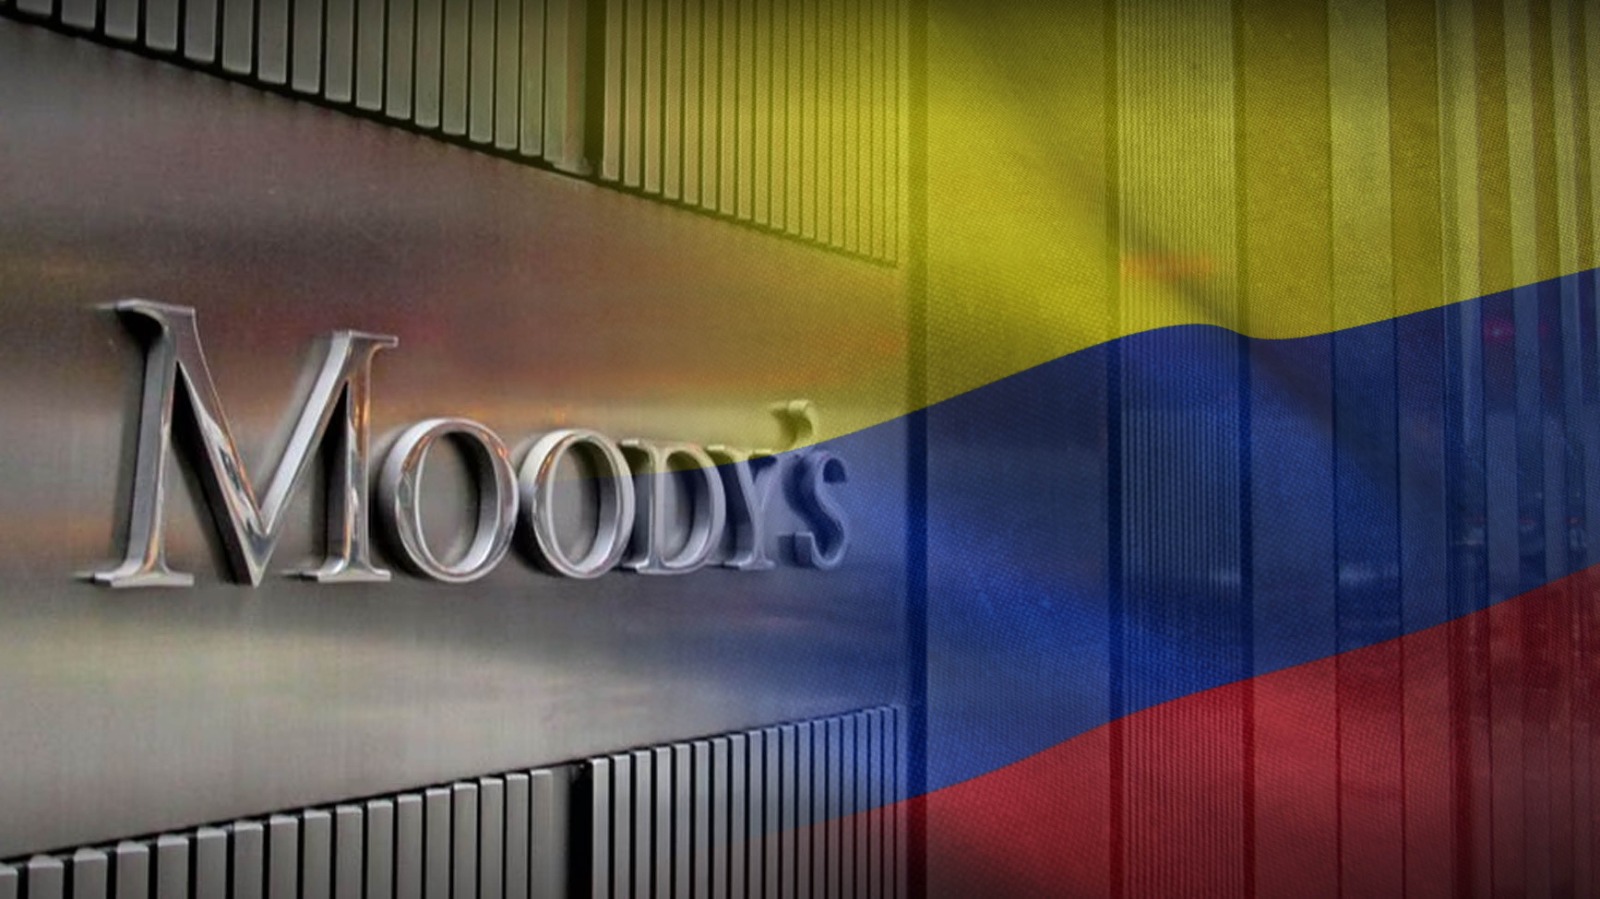 https://www.mundovideo.com.co/colombian-gambling-news/the-political-counterweight-has-worked-in-colombia-according-to-moodys